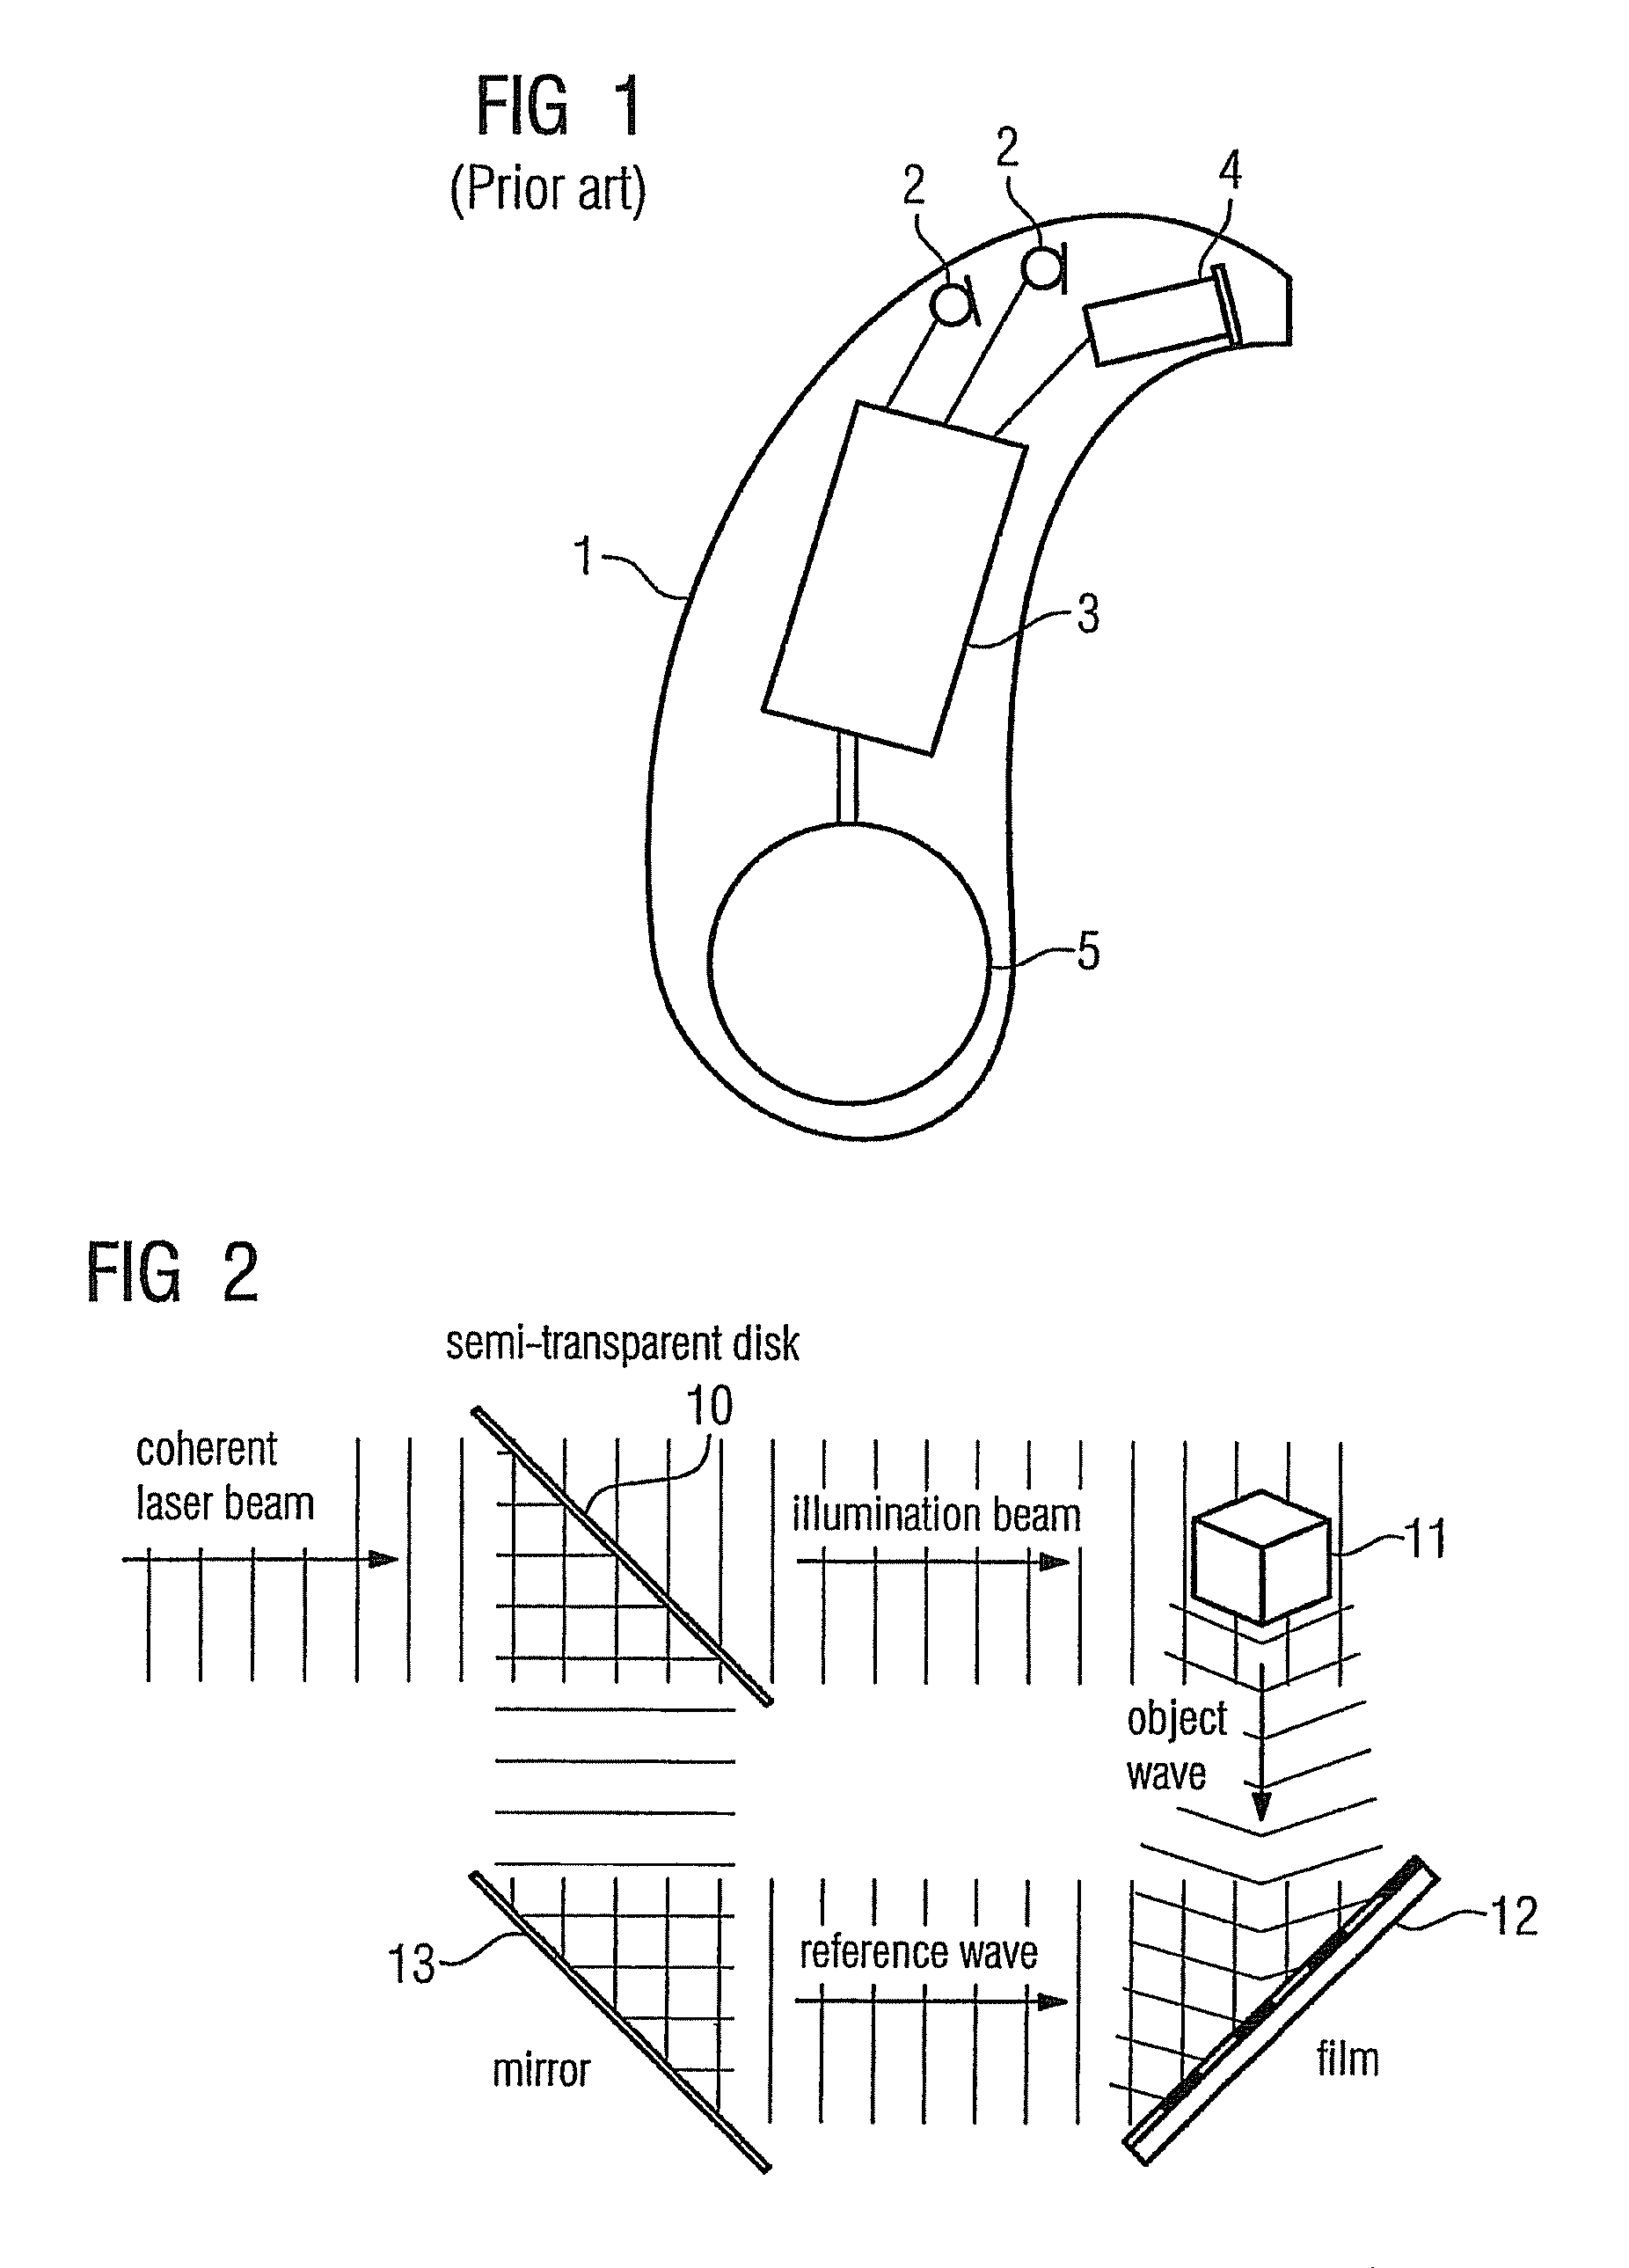 Ear canal hologram for hearing apparatuses